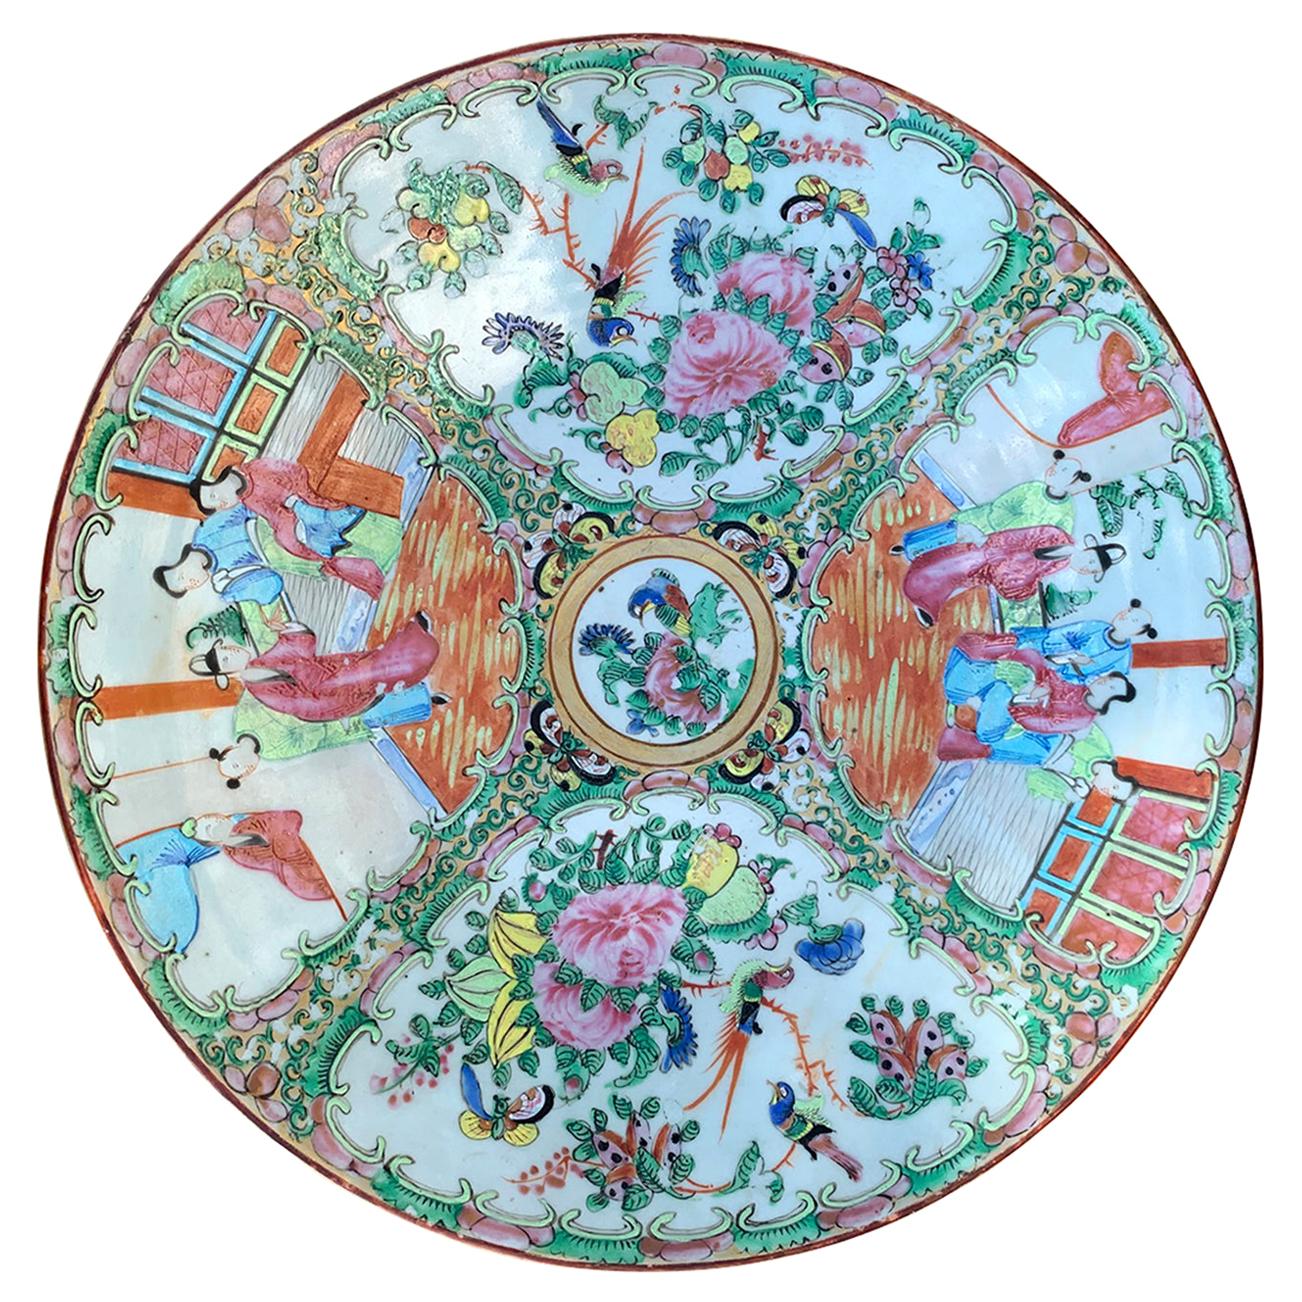 19th-20th Century Chinese Rose Medallion Porcelain Charger